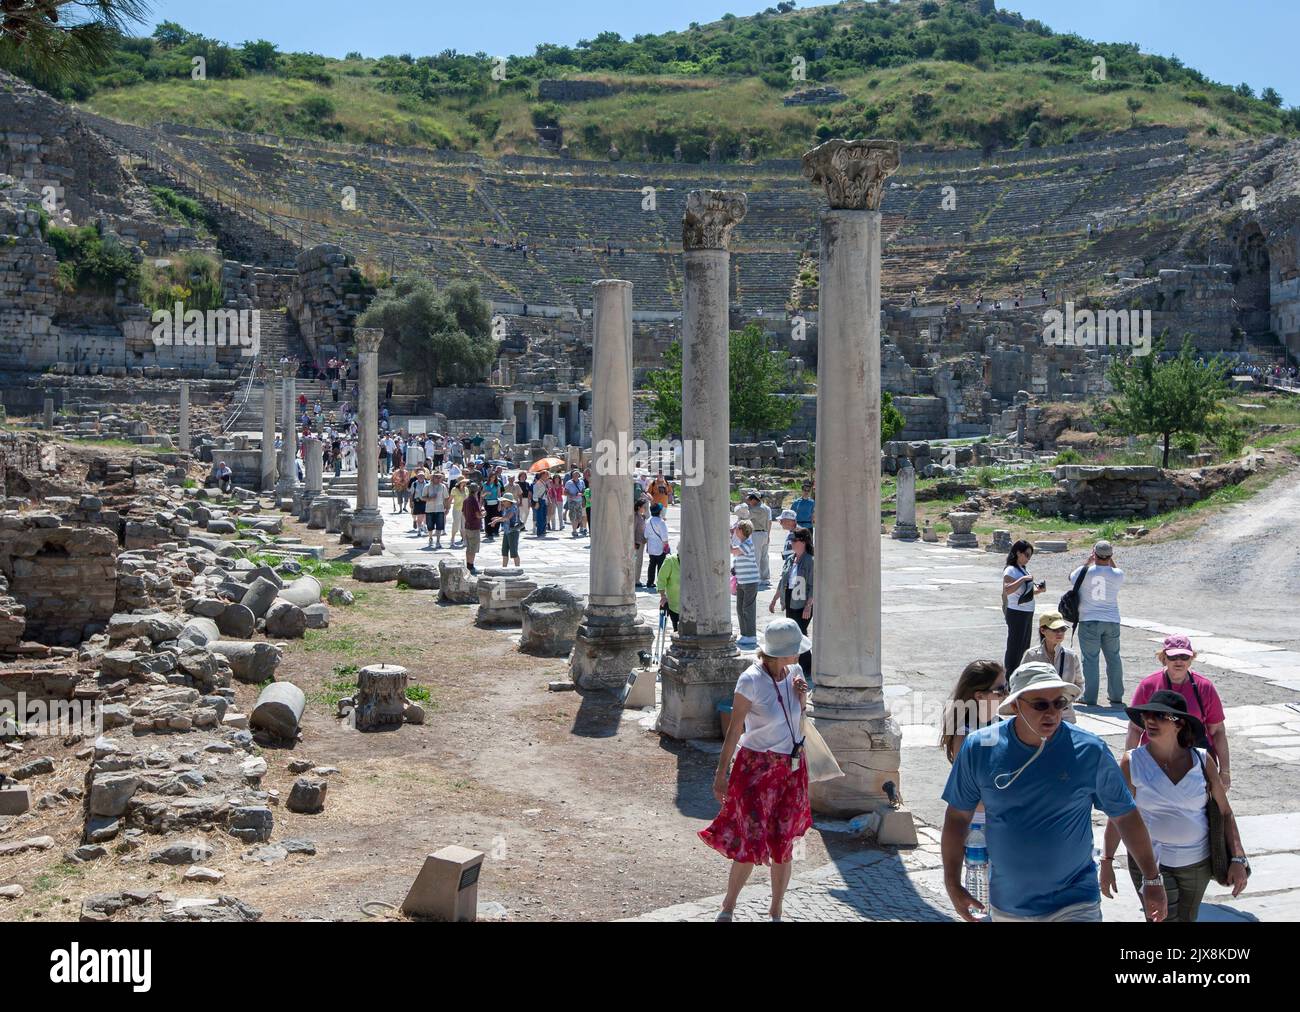 Tourists walk along Harbour Street after visiting the Roman Theatre at the ancient city of Ephesus in Turkey. Stock Photo